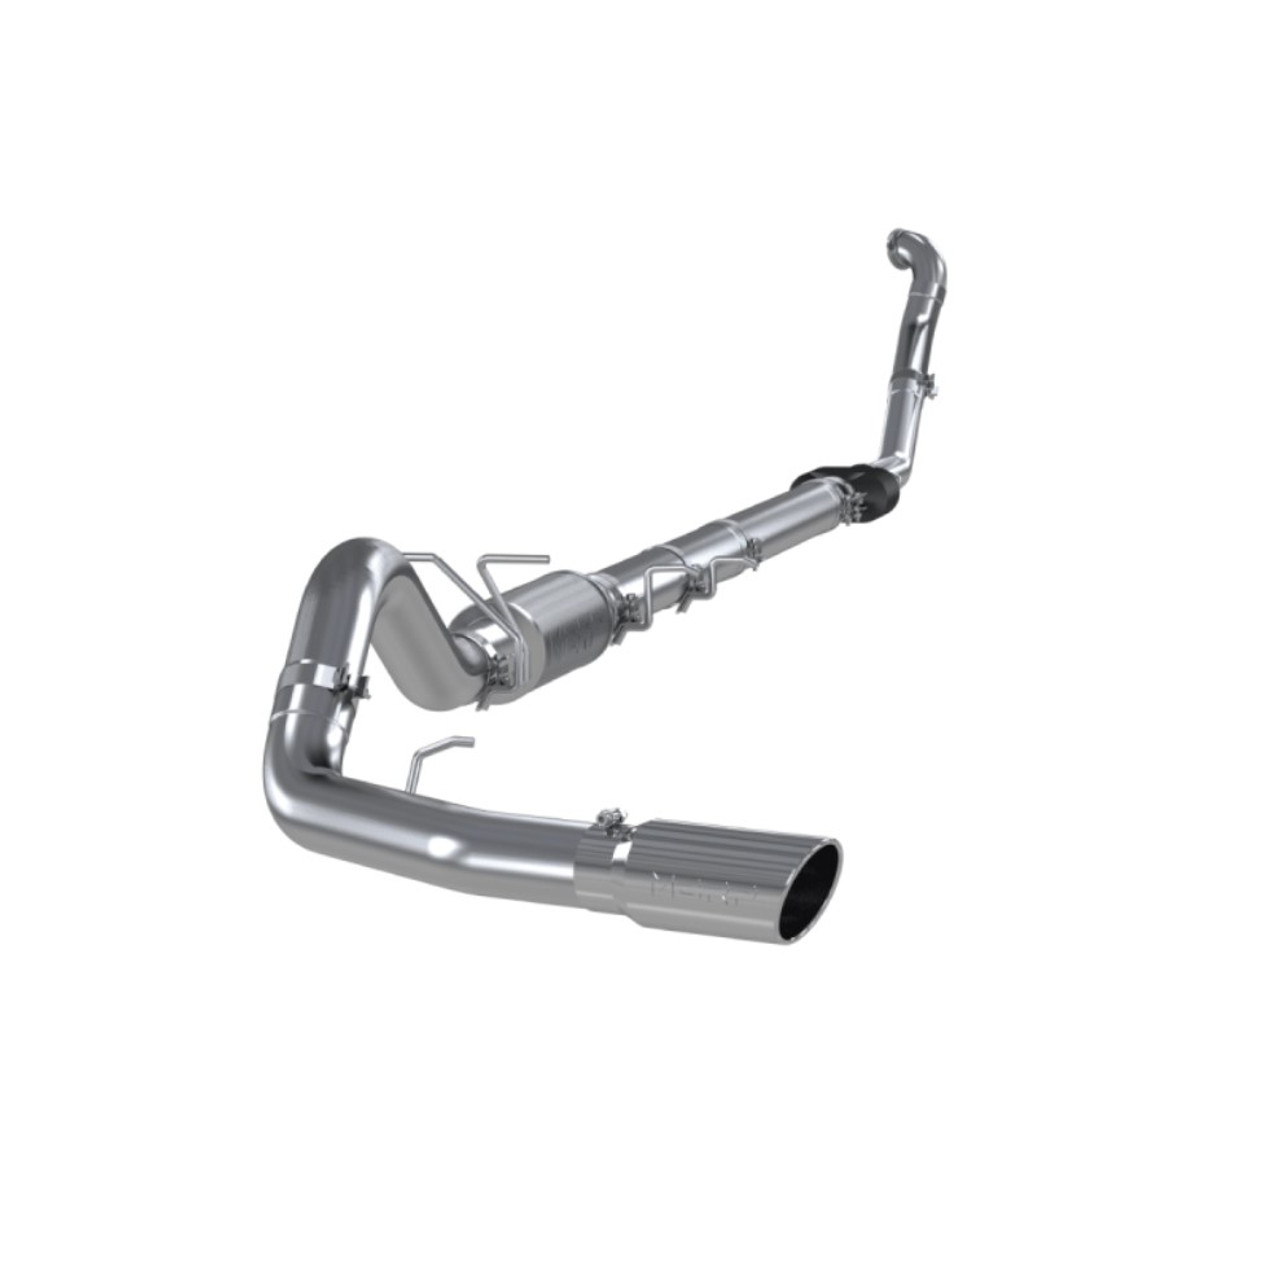 MBRP 4" EXHAUST KIT 94-97 FORD POWERSTROKE DIESEL 7.3L w TIP USES STOCK CAT